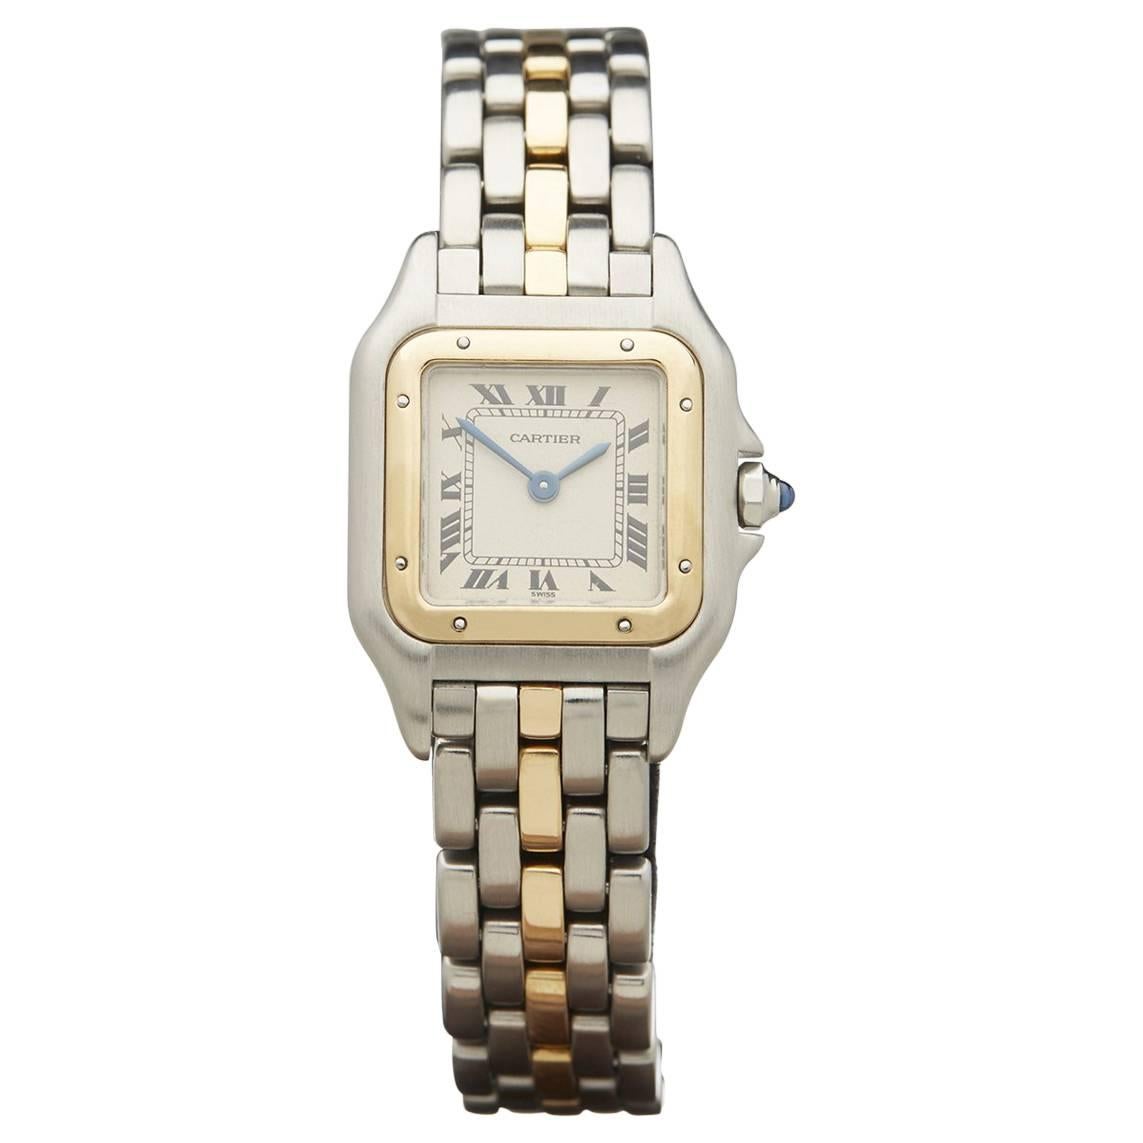 Cartier ladies Stainless Steel Yellow Gold Panthere Quartz Wristwatch Ref 669